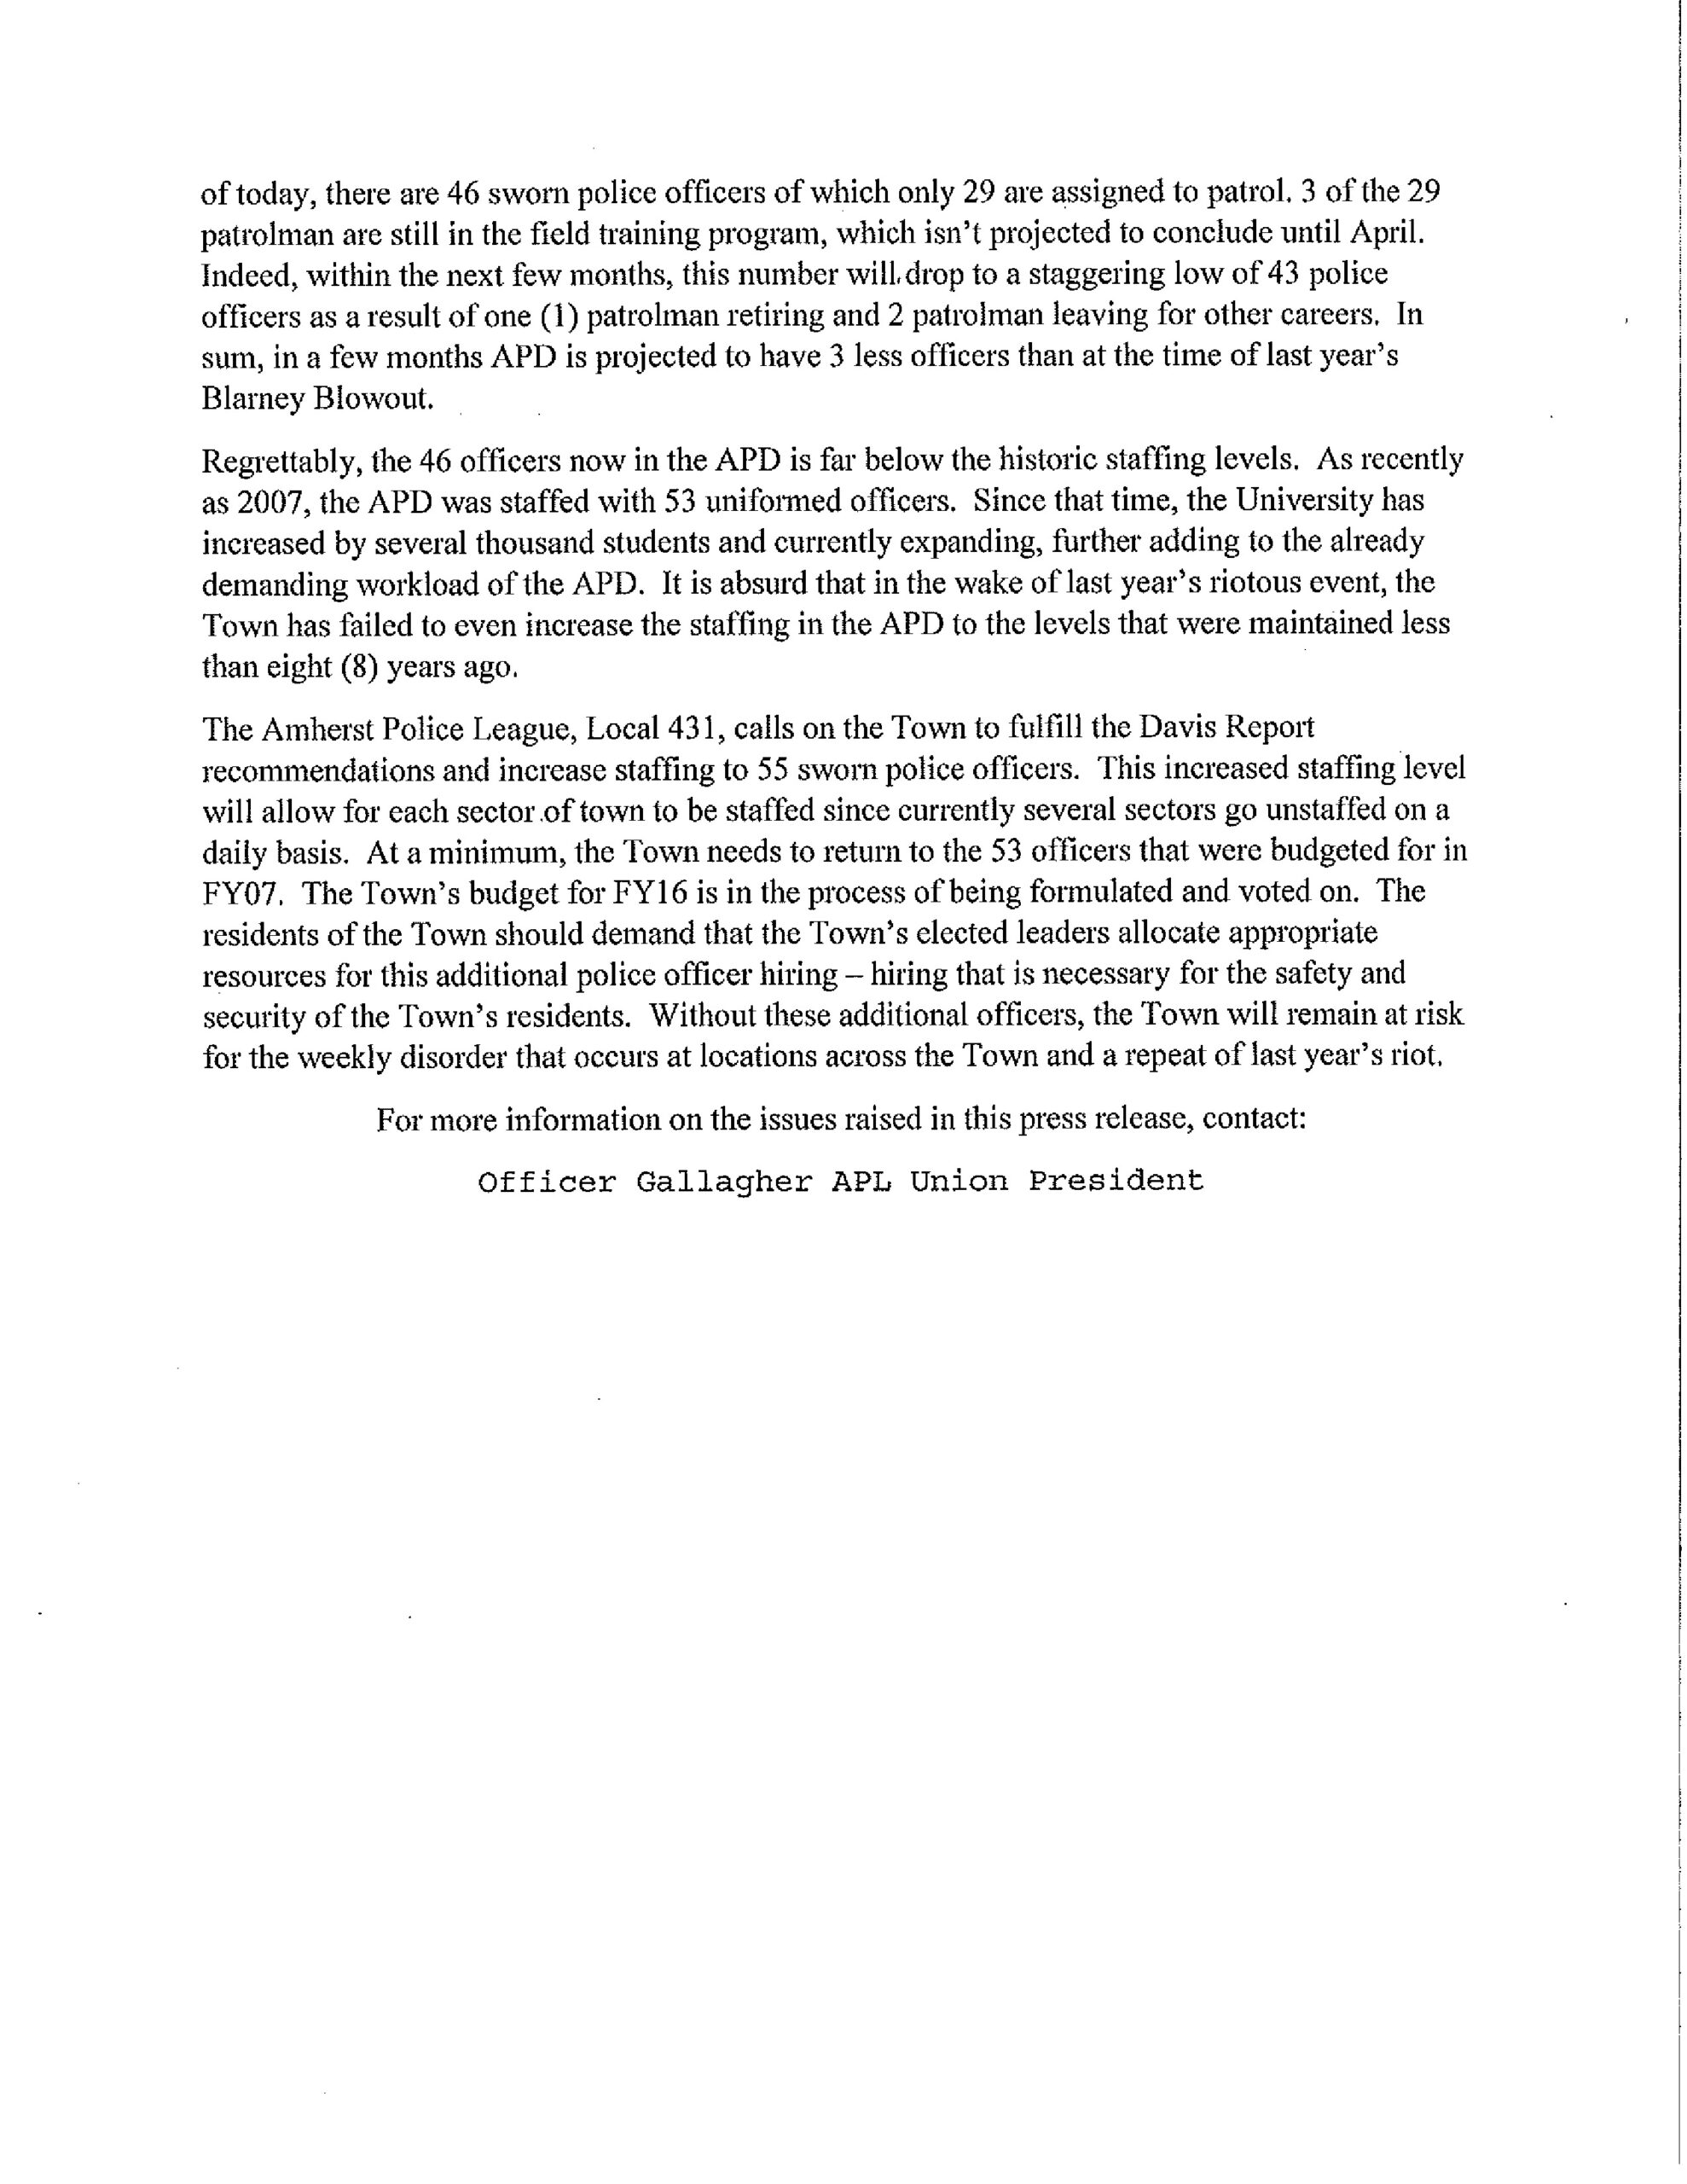 Amherst Press Release 02-15-page-2